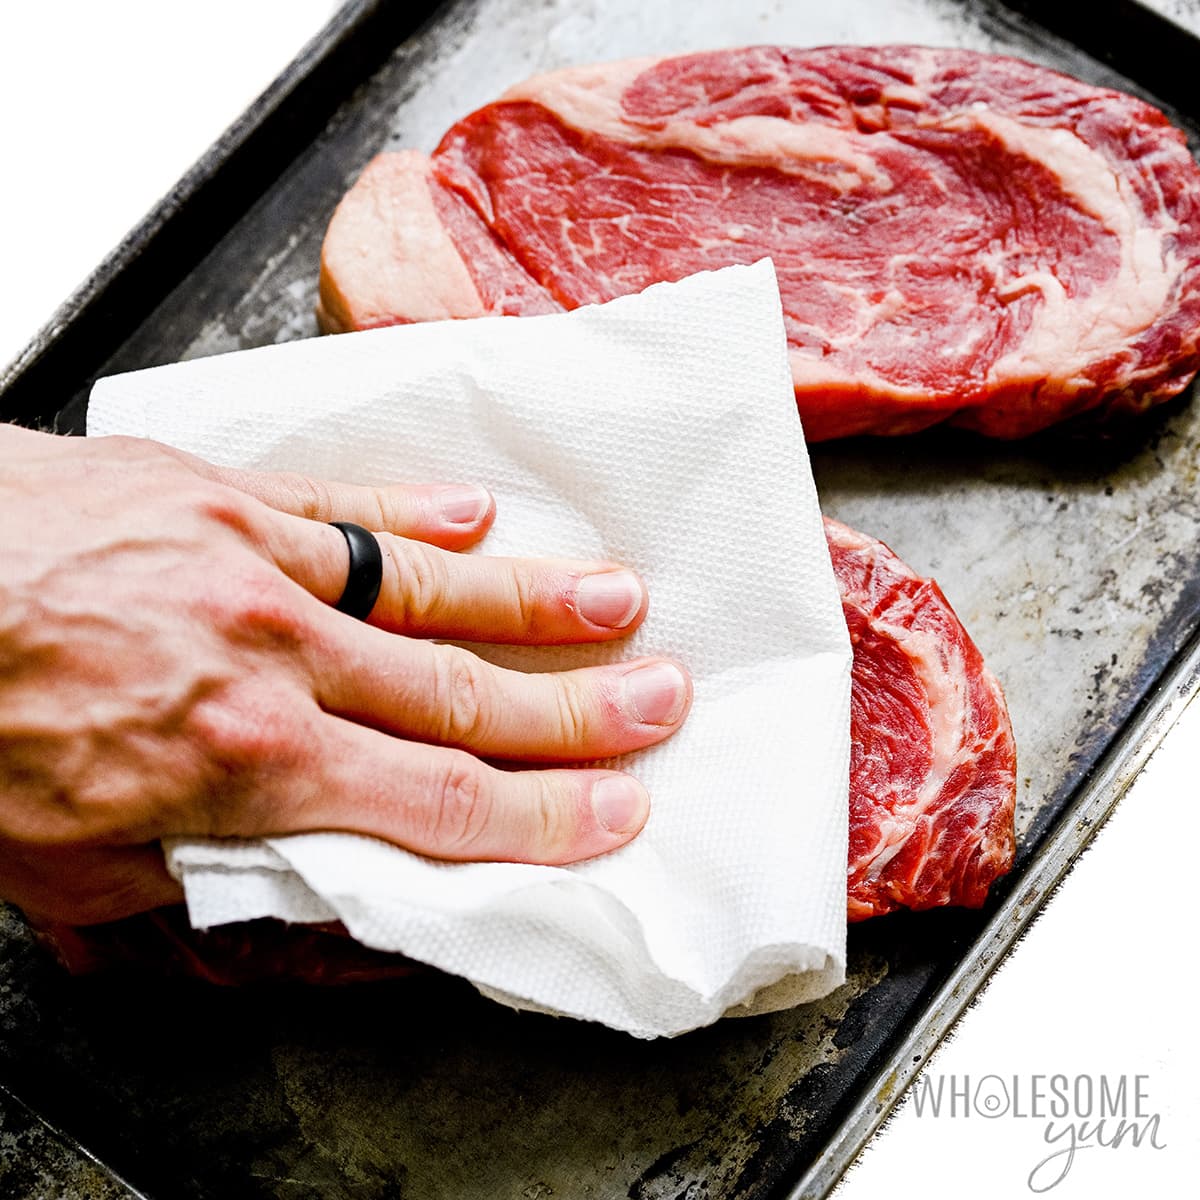 Pat raw steaks dry with paper towels.